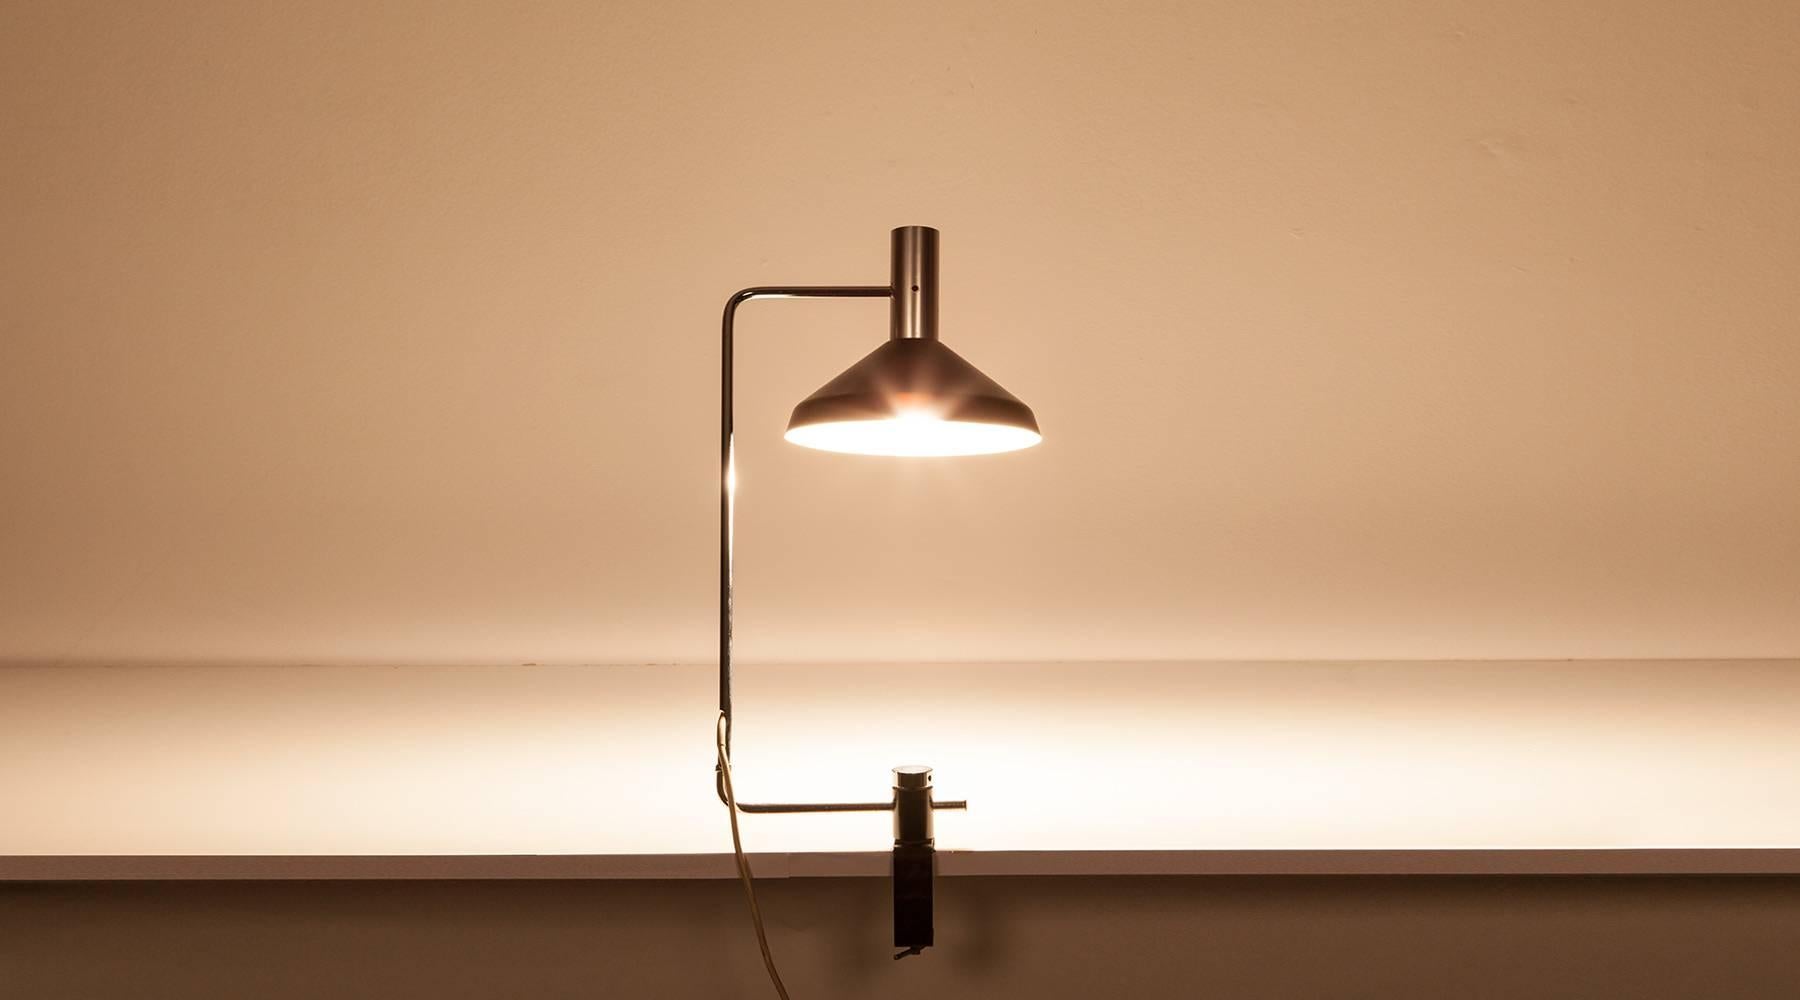 The double pivoting desk lamp designed by Rico Baltensweiler made for clamping to a table can be posed in various positions and comes in lacquered aluminum and metal, the adjustable pole is chromium plated steel. Manufactured by Baltensweiler AG. We